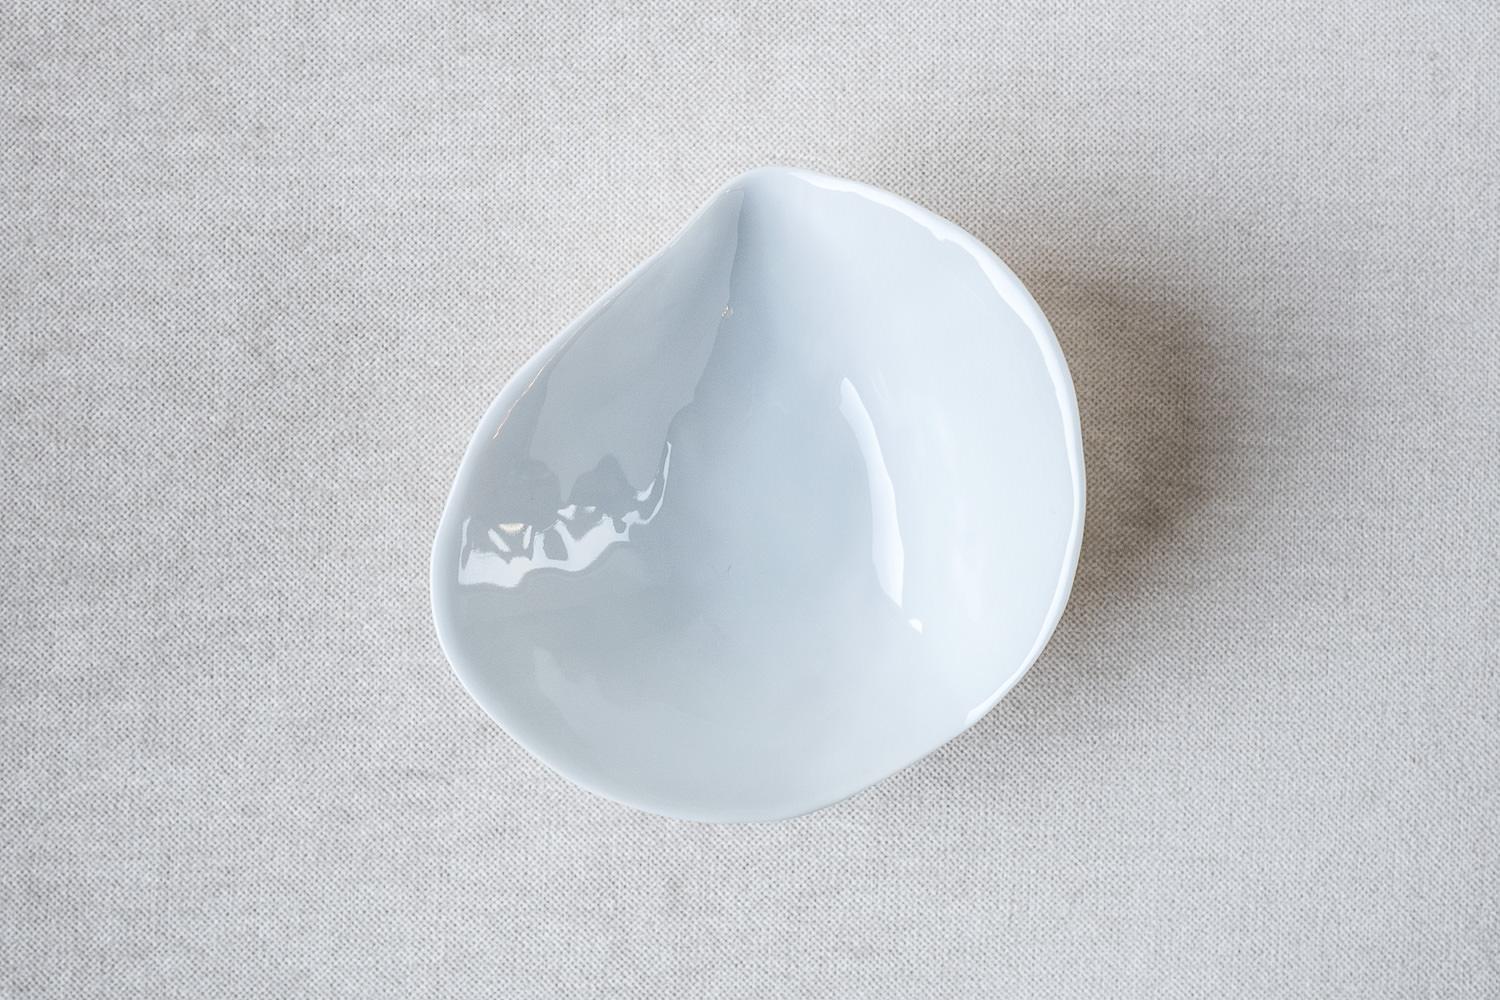 • Small side bowl
• Measures: 10.5cm x 11cm x 4.7cm
• Perfect for a sexy amuse-bouche, a pre-dessert or side dish
• White glazed top, unglazed textured bottom
• Designed in Amsterdam / handmade in France
• True Porcelaine de Limoges
•